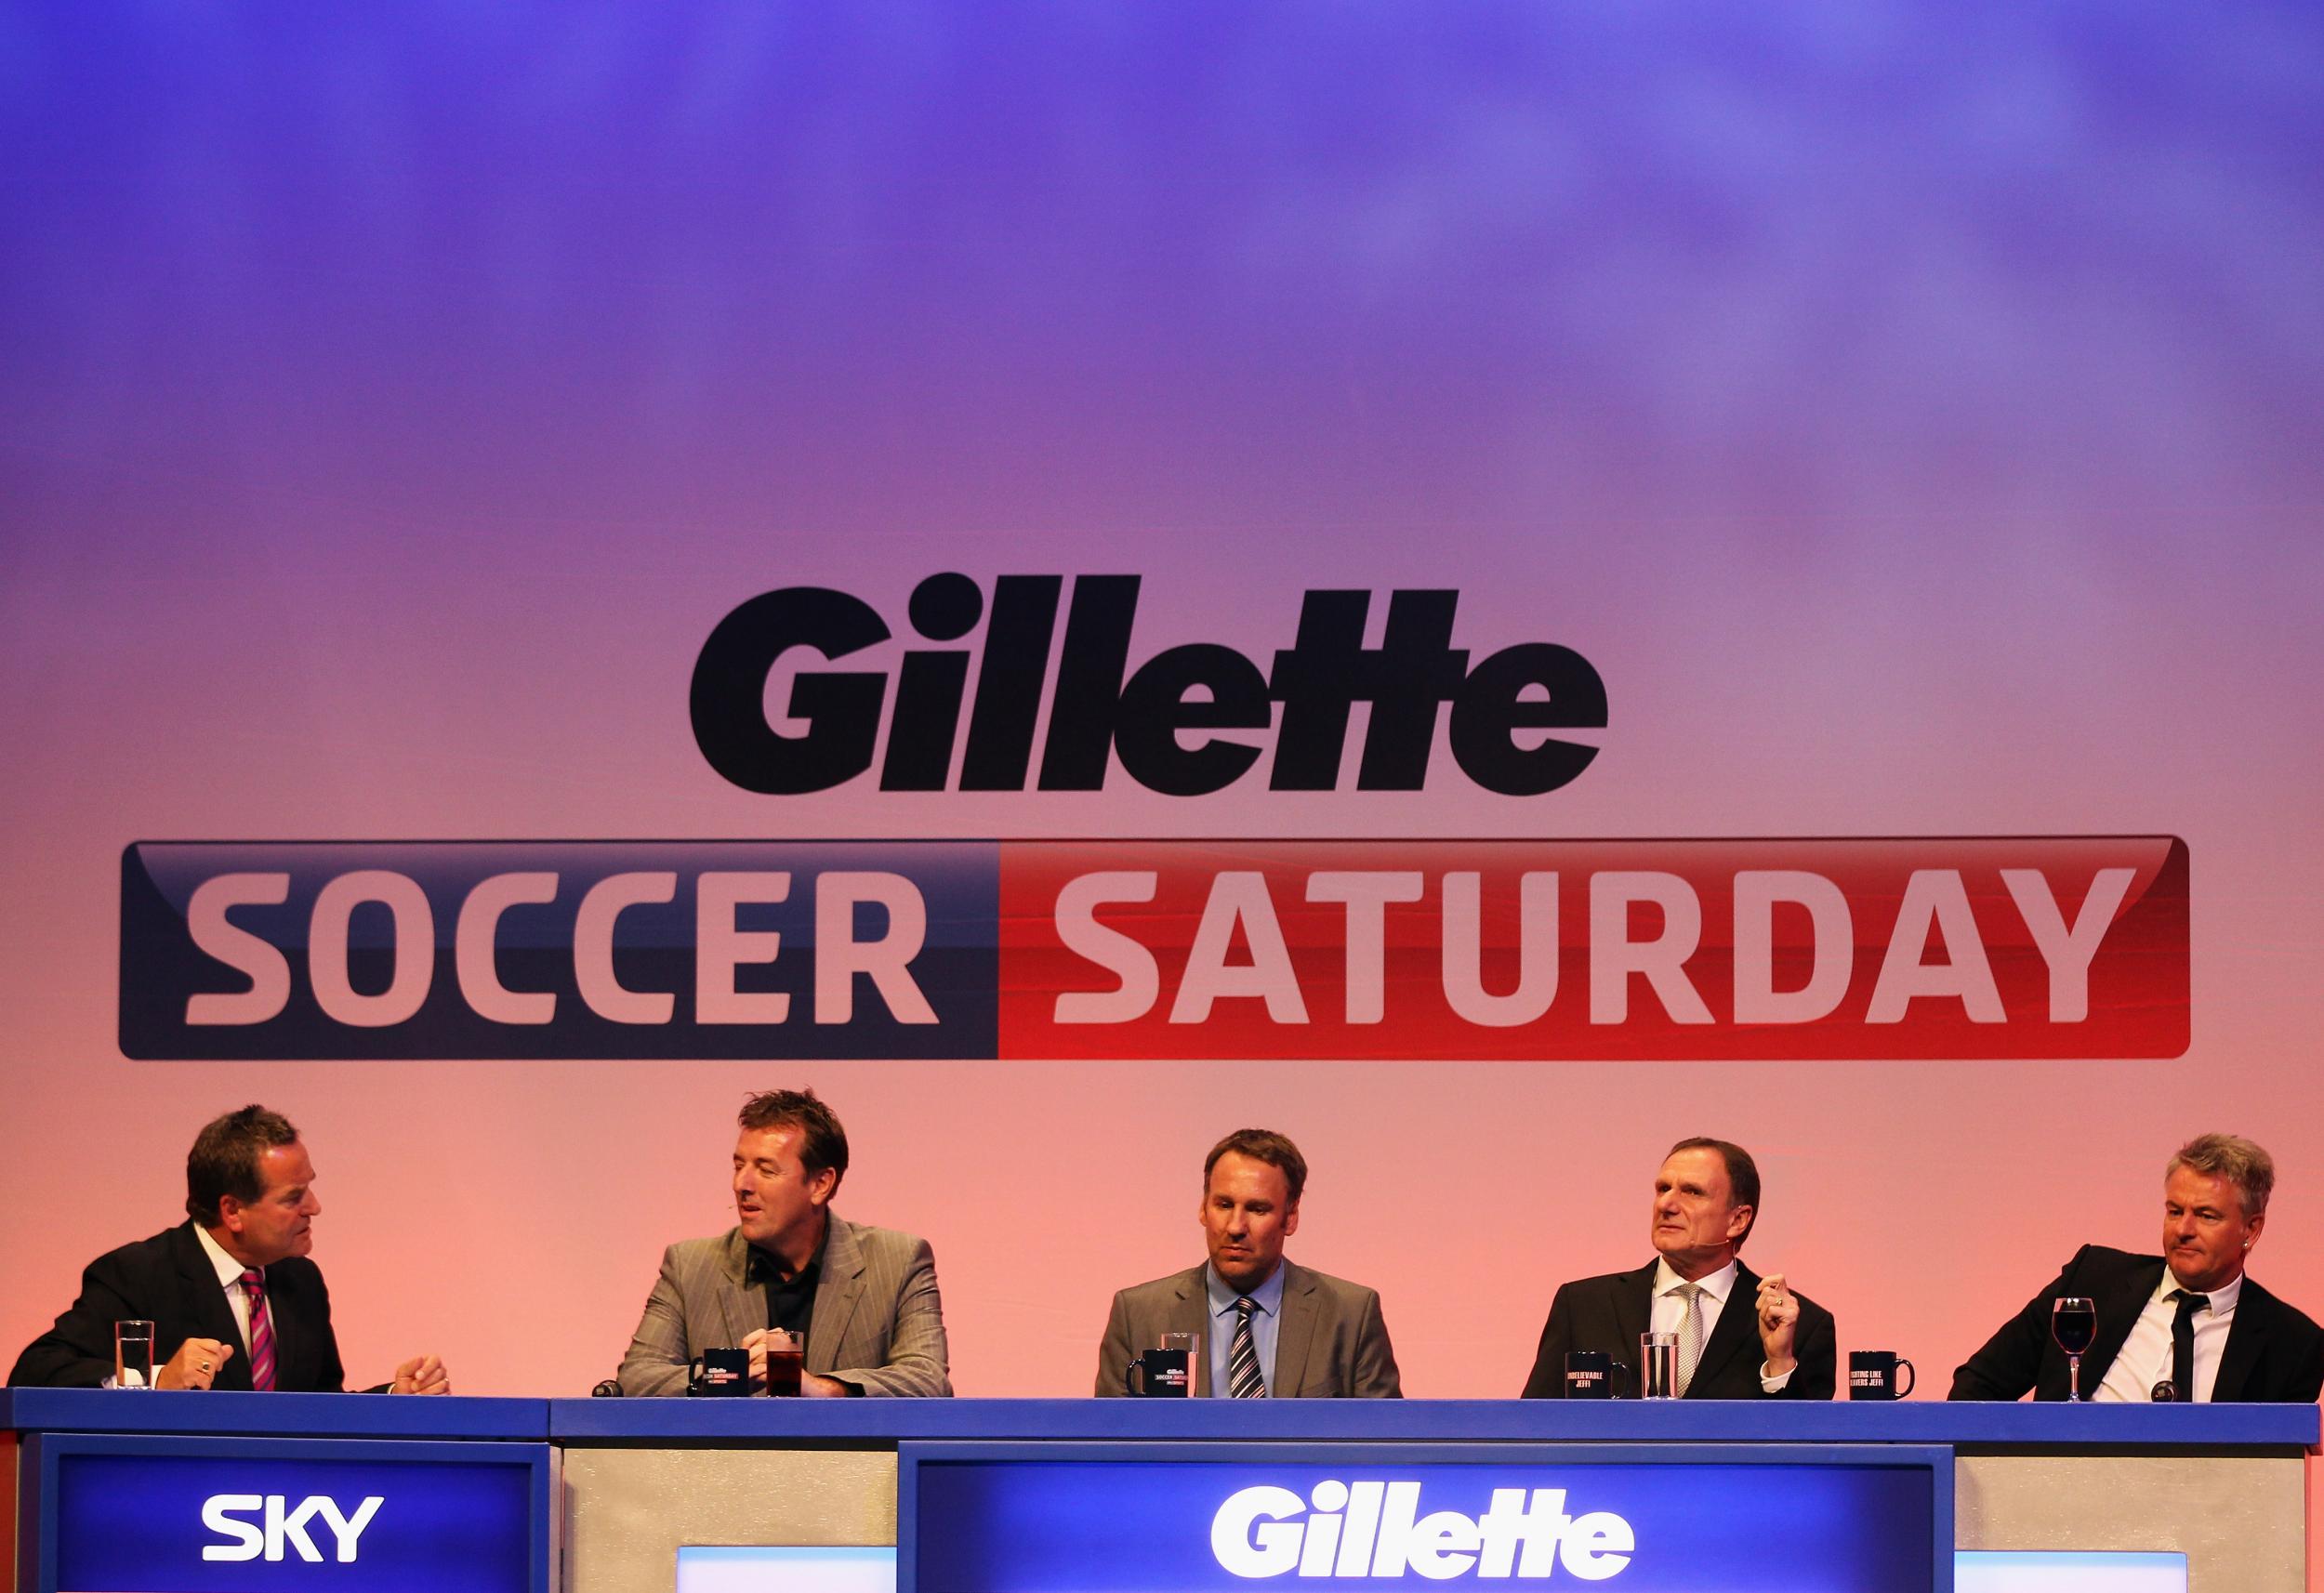 Le Tissier, Nicholas and Thompson were regulars on Sky's Soccer Saturday programme